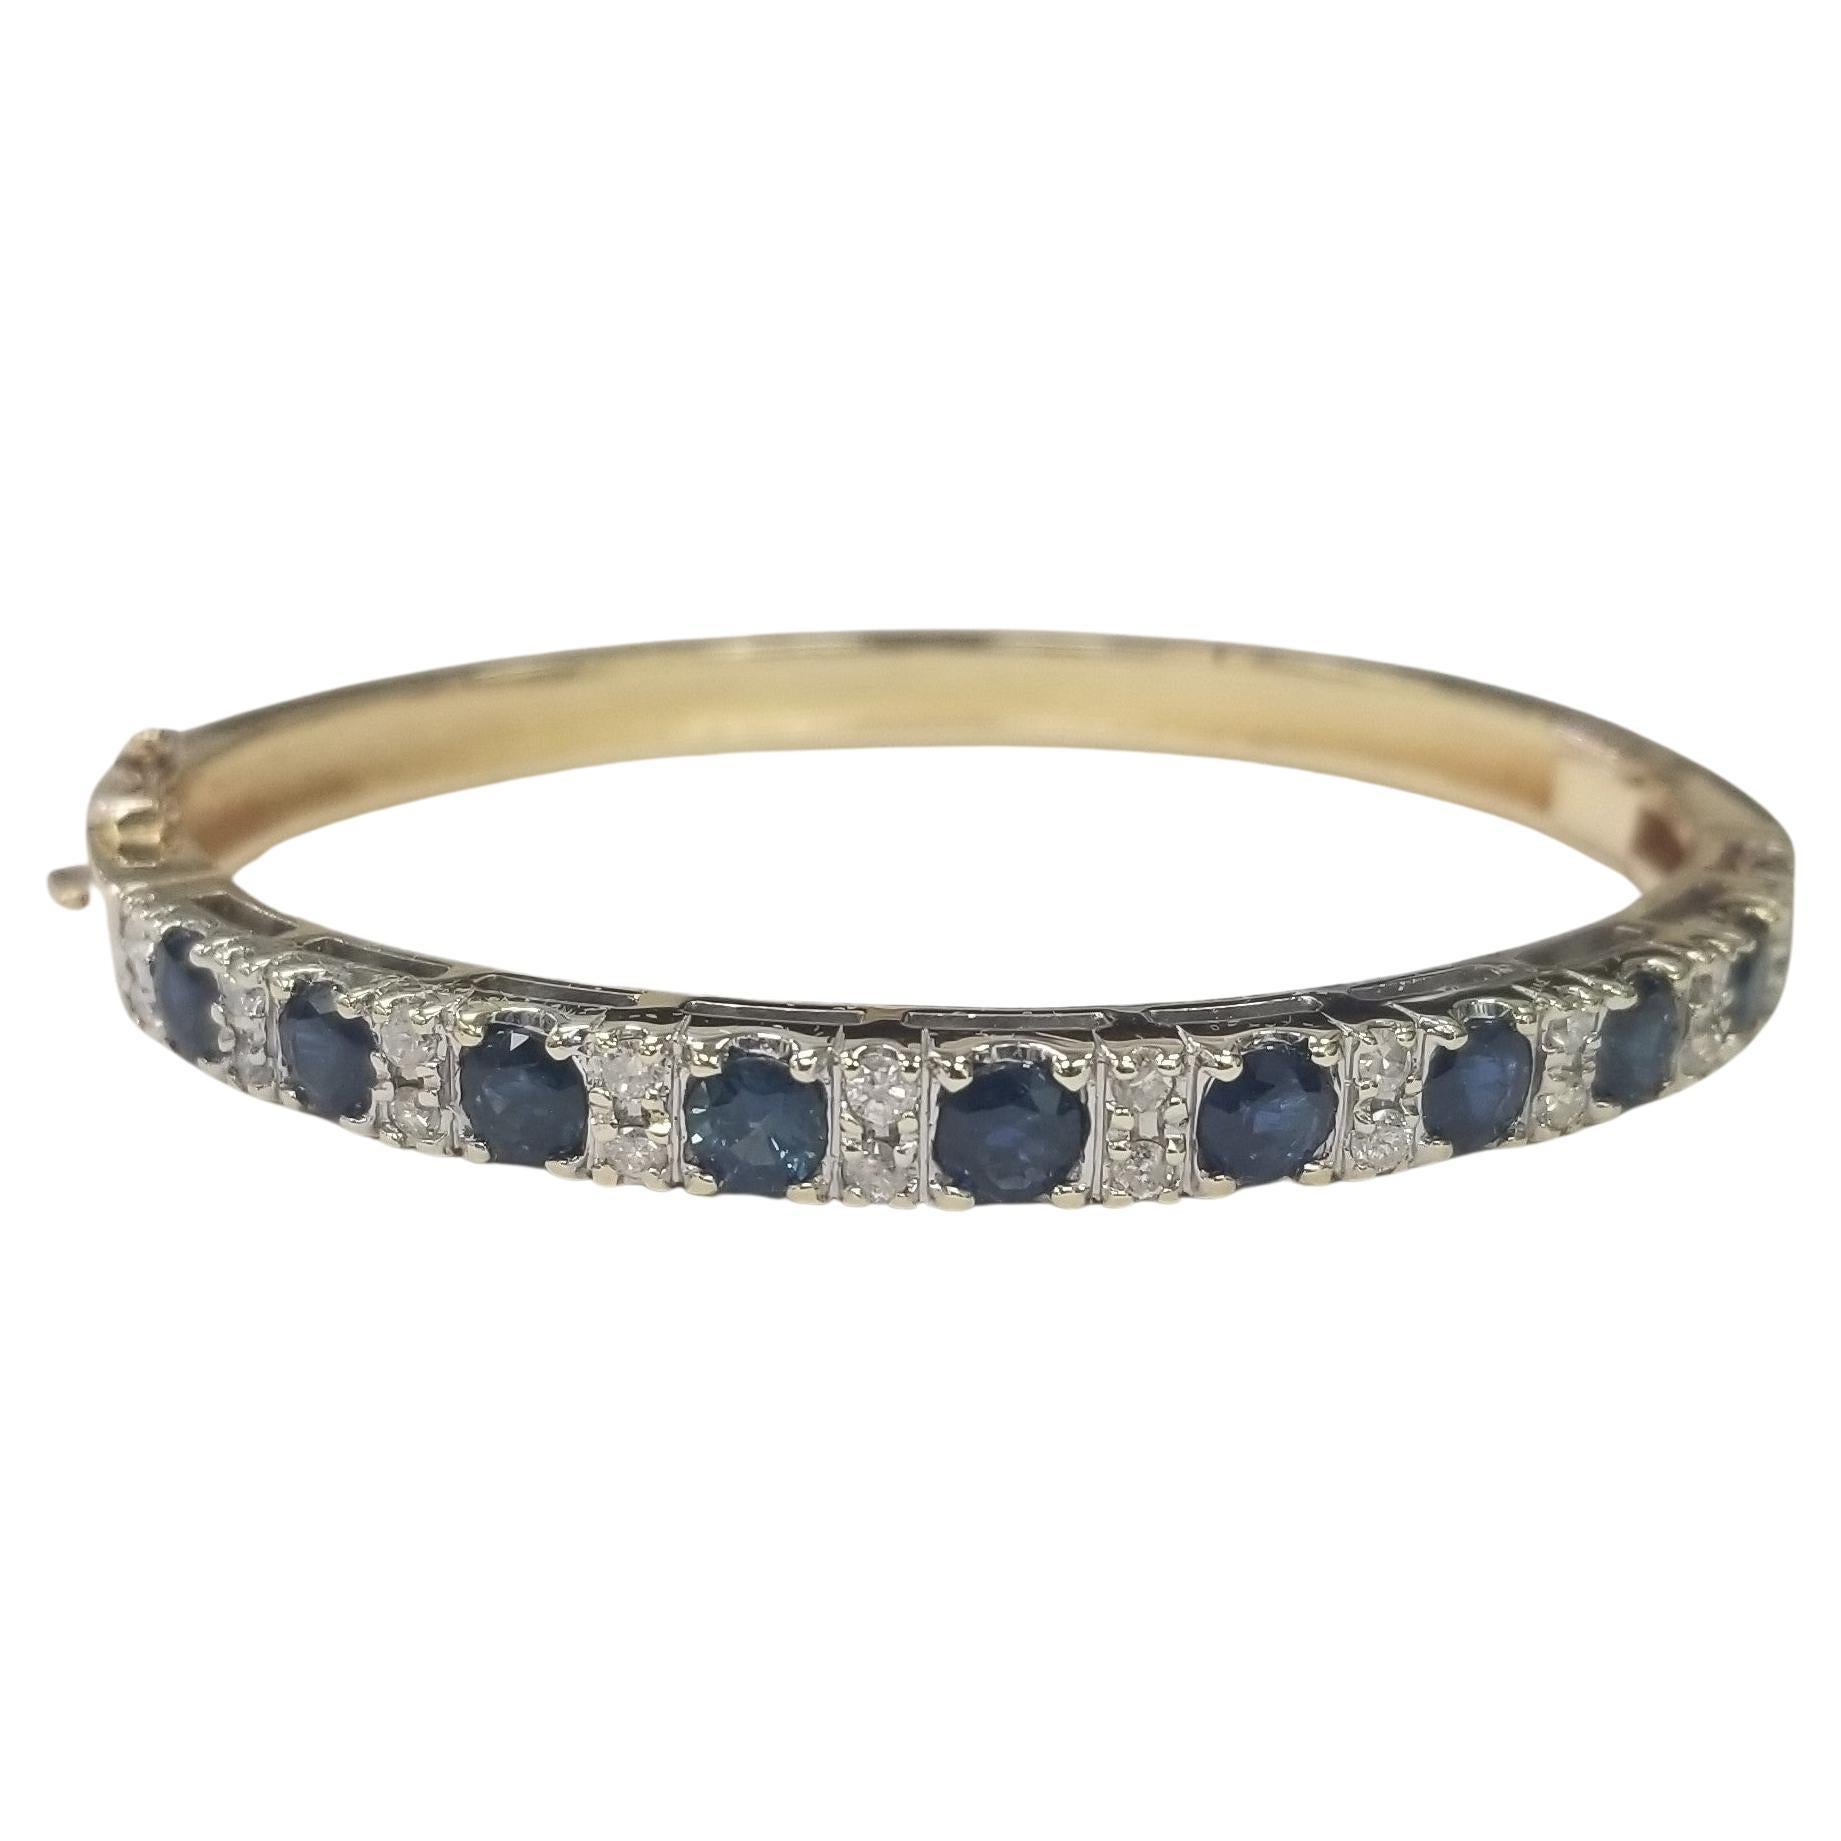 14k Yellow Gold Sapphire and Diamond "Bangle" Bracelet Weighing 4.00cts.